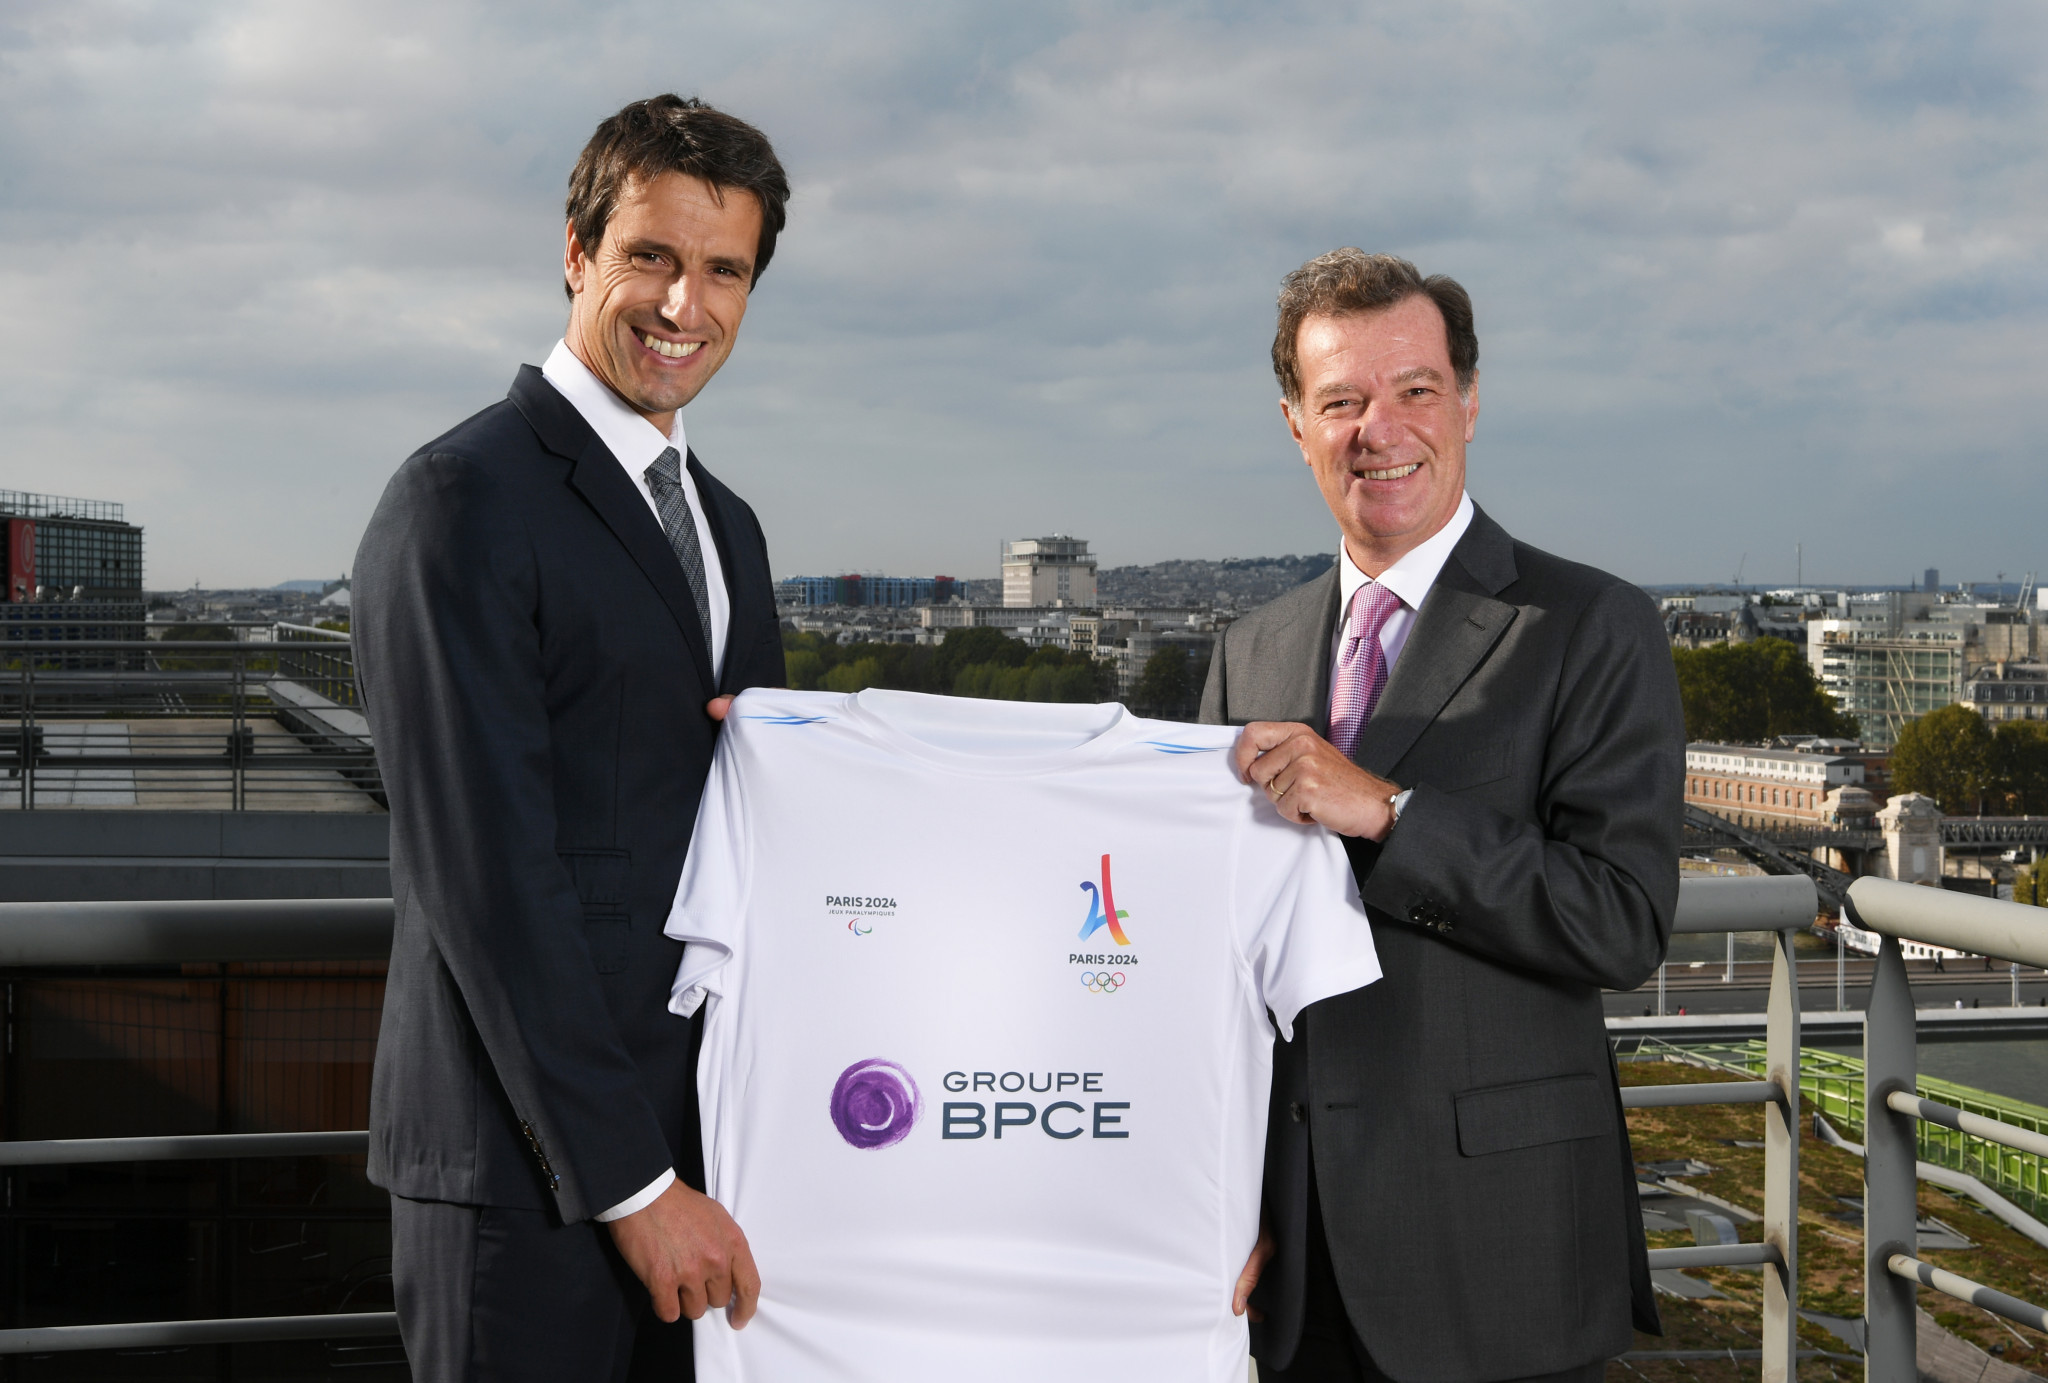 Groupe BPCE were the first to join Paris 2024's national partnership programme ©Paris 2024